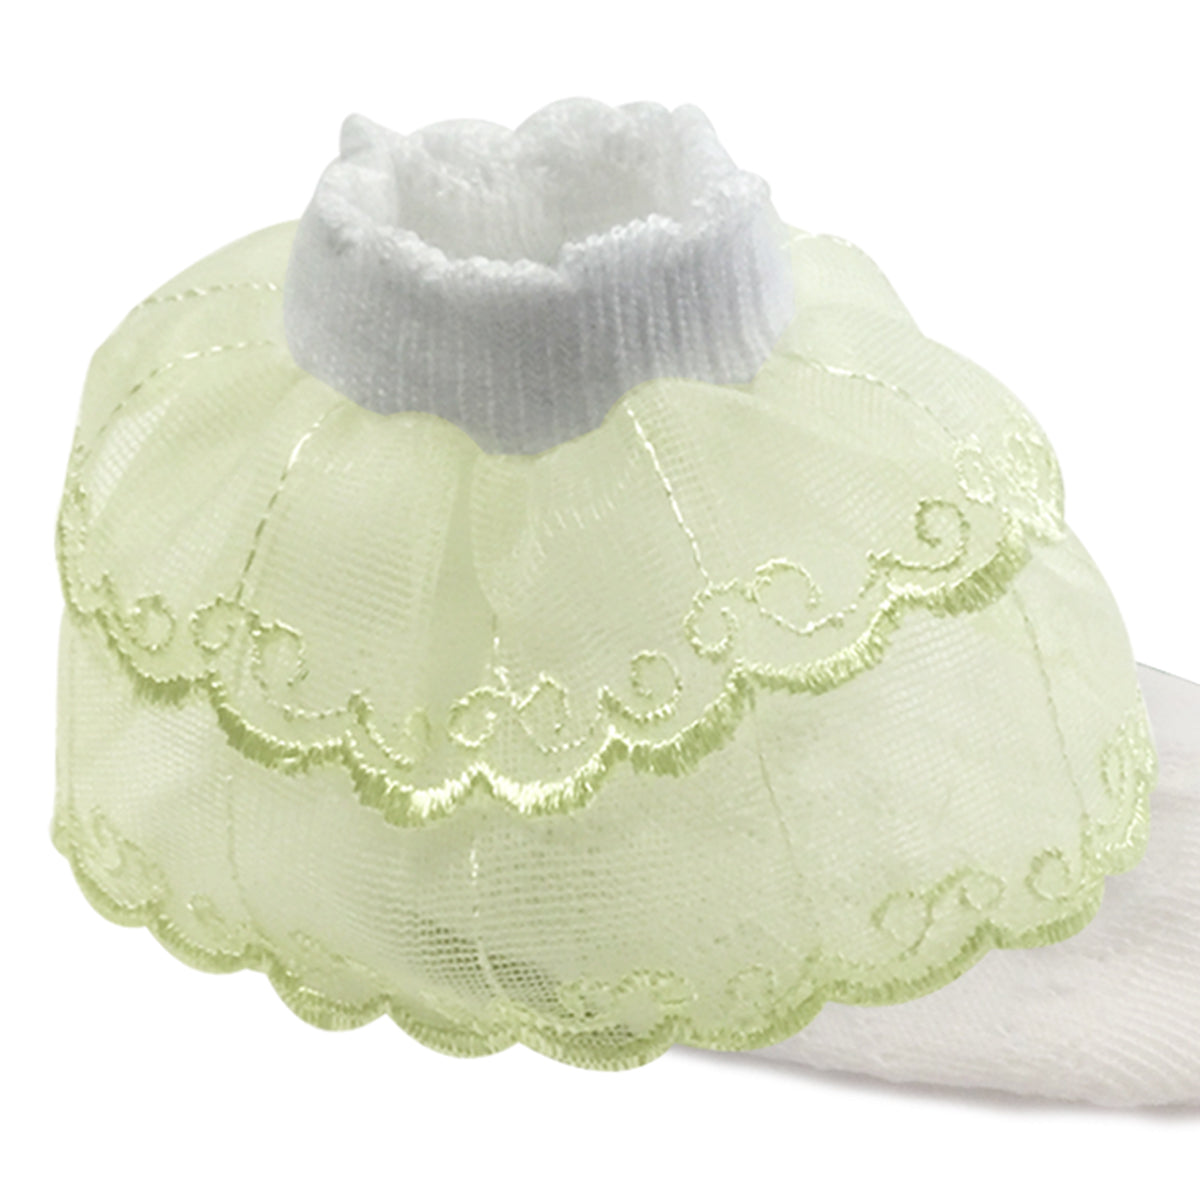 Wrapables Lil Miss Emily Double Layer Lace Ruffle Socks Set of 2, Green